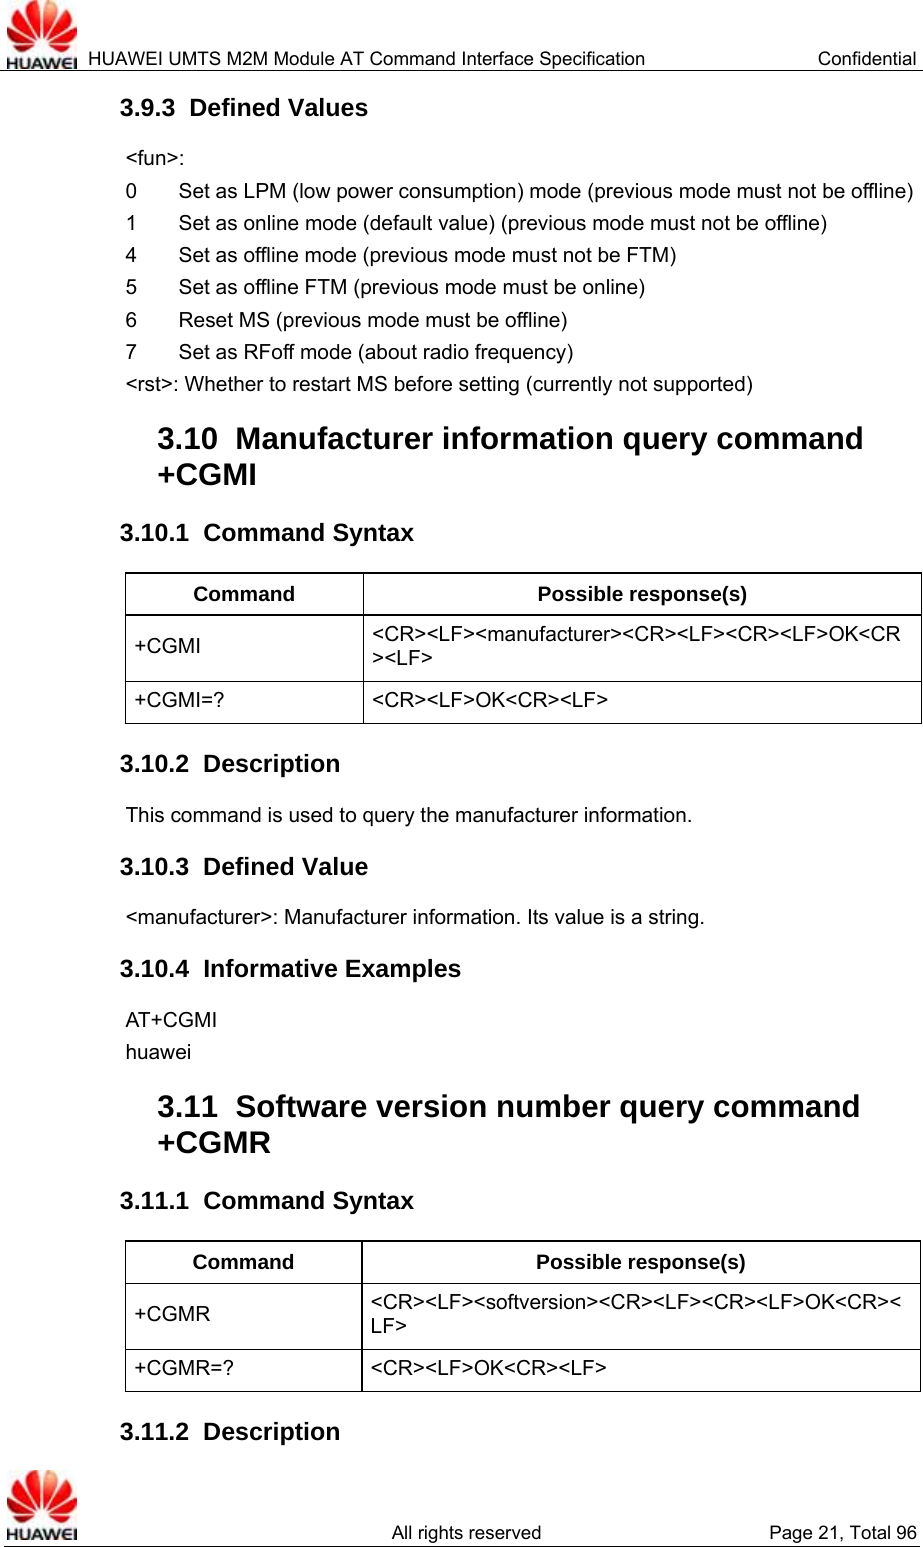  HUAWEI UMTS M2M Module AT Command Interface Specification  Confidential   All rights reserved  Page 21, Total 96 3.9.3  Defined Values &lt;fun&gt;:  0        Set as LPM (low power consumption) mode (previous mode must not be offline) 1        Set as online mode (default value) (previous mode must not be offline) 4        Set as offline mode (previous mode must not be FTM) 5        Set as offline FTM (previous mode must be online) 6        Reset MS (previous mode must be offline) 7    Set as RFoff mode (about radio frequency) &lt;rst&gt;: Whether to restart MS before setting (currently not supported) 3.10  Manufacturer information query command +CGMI 3.10.1  Command Syntax Command Possible response(s) +CGMI  &lt;CR&gt;&lt;LF&gt;&lt;manufacturer&gt;&lt;CR&gt;&lt;LF&gt;&lt;CR&gt;&lt;LF&gt;OK&lt;CR&gt;&lt;LF&gt; +CGMI=? &lt;CR&gt;&lt;LF&gt;OK&lt;CR&gt;&lt;LF&gt; 3.10.2  Description This command is used to query the manufacturer information.   3.10.3  Defined Value &lt;manufacturer&gt;: Manufacturer information. Its value is a string.   3.10.4  Informative Examples AT+CGMI huawei 3.11  Software version number query command +CGMR 3.11.1  Command Syntax Command Possible response(s) +CGMR  &lt;CR&gt;&lt;LF&gt;&lt;softversion&gt;&lt;CR&gt;&lt;LF&gt;&lt;CR&gt;&lt;LF&gt;OK&lt;CR&gt;&lt;LF&gt; +CGMR=? &lt;CR&gt;&lt;LF&gt;OK&lt;CR&gt;&lt;LF&gt; 3.11.2  Description 